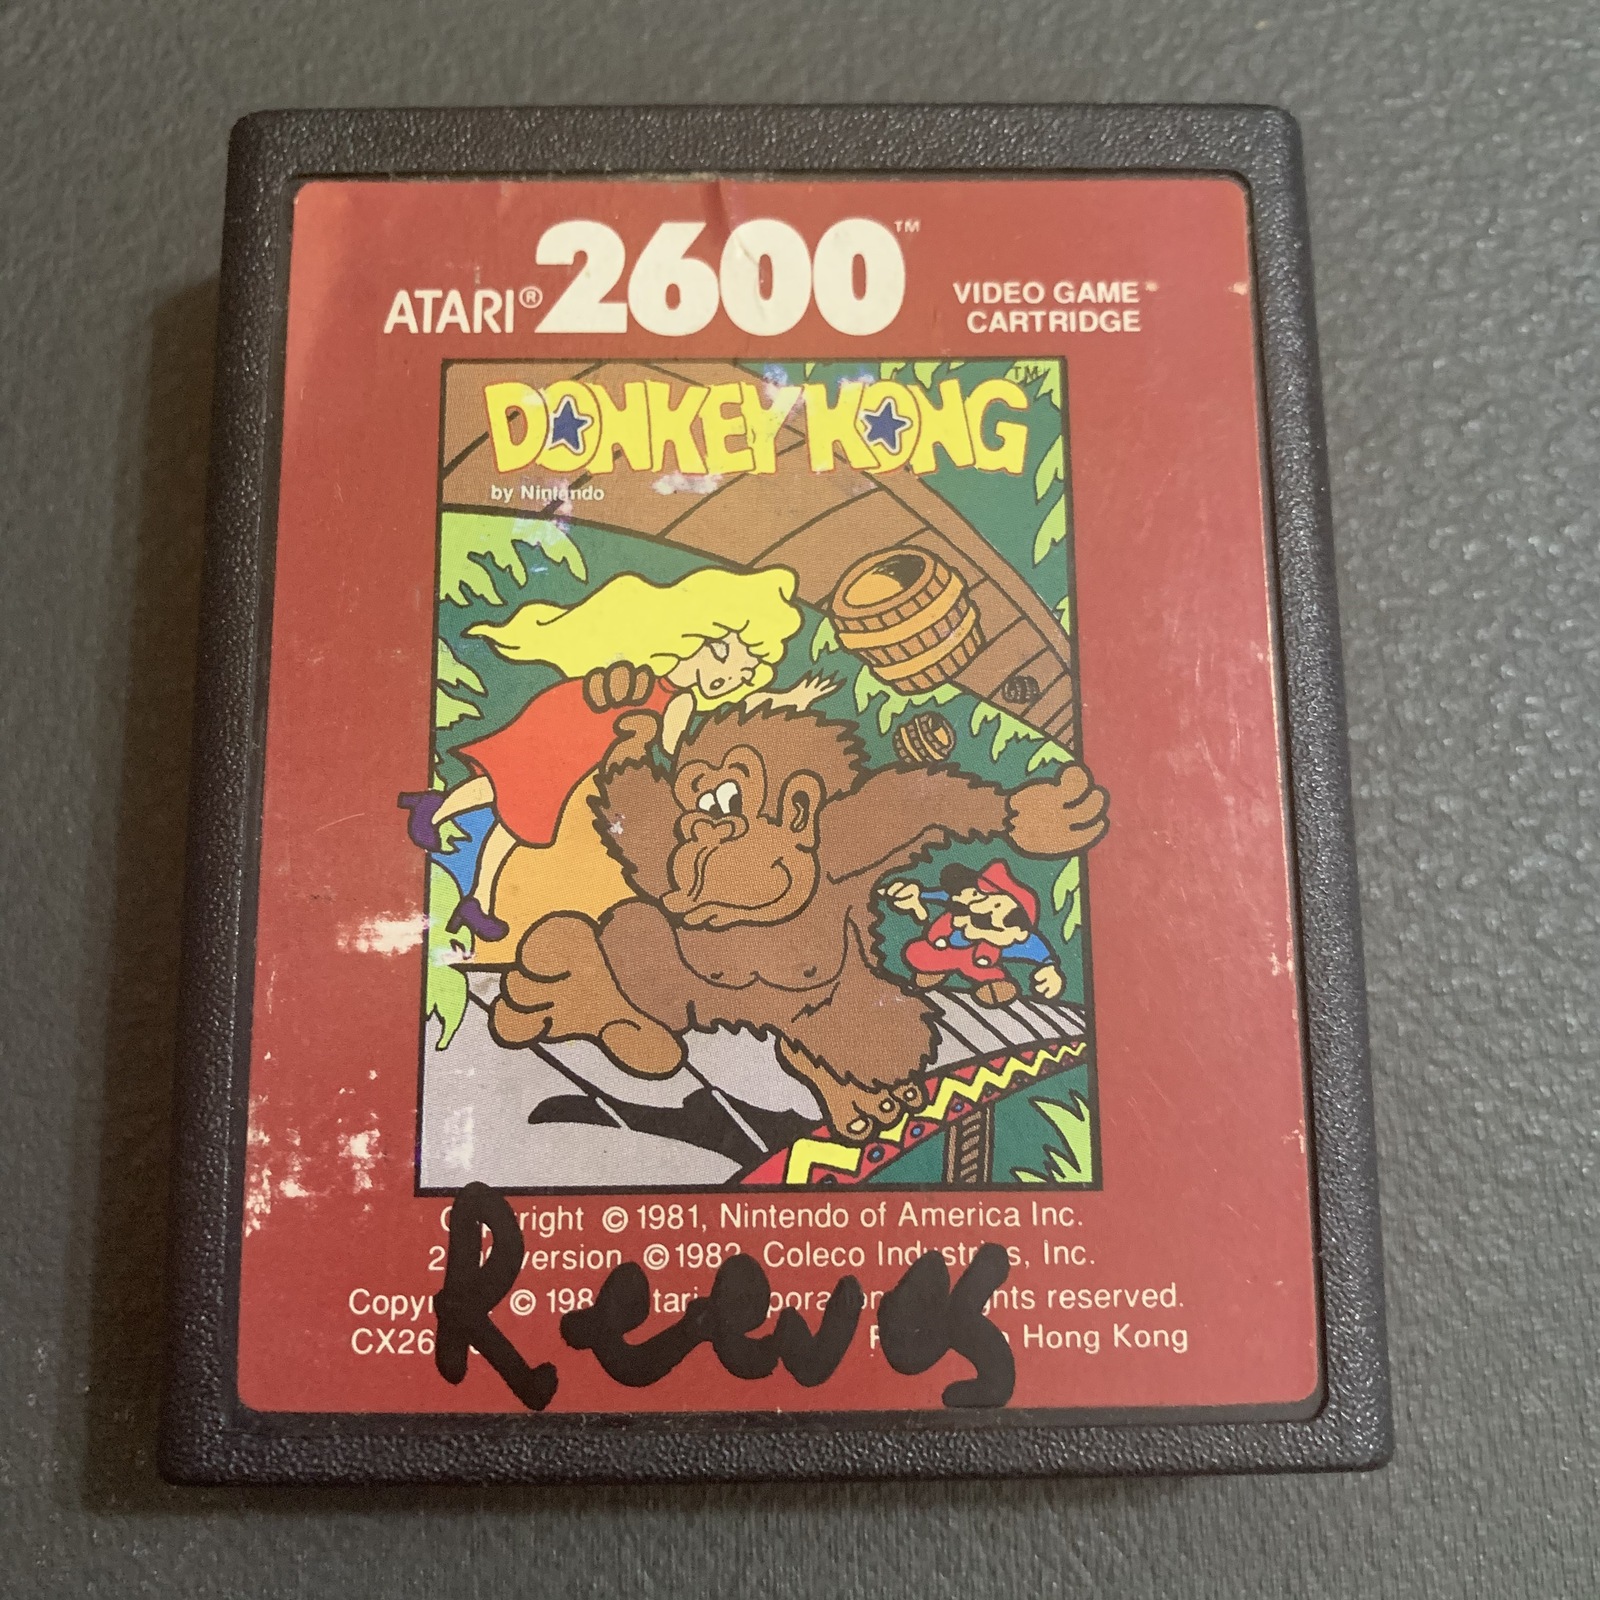 Primary image for ATARI 2600 Donkey Kong red label tested video game cartridge CX26143 arcade fun